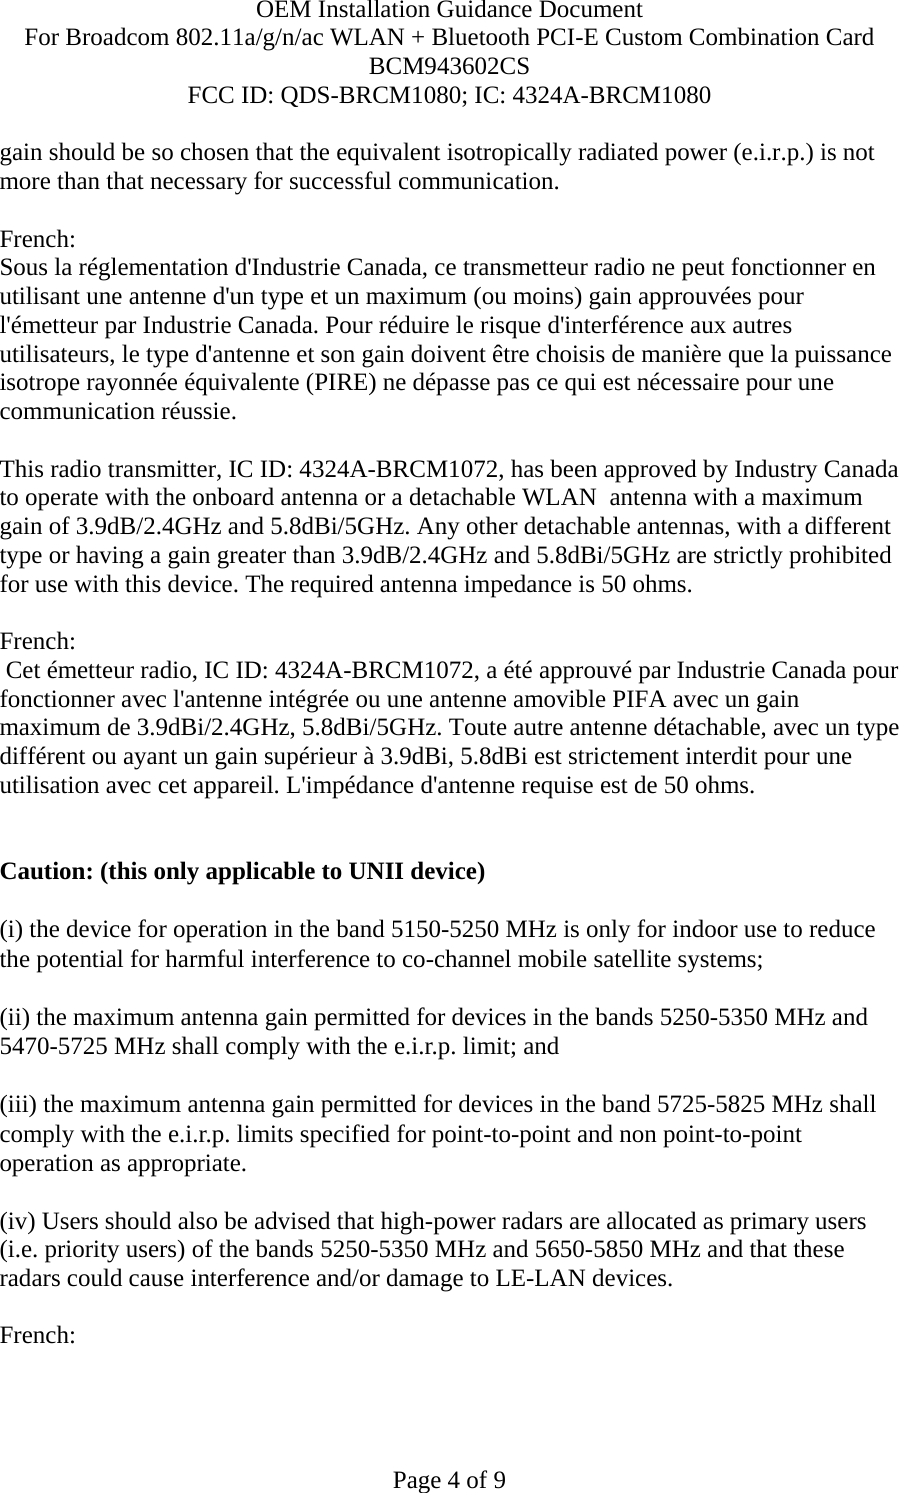 OEM Installation Guidance Document For Broadcom 802.11a/g/n/ac WLAN + Bluetooth PCI-E Custom Combination Card BCM943602CS FCC ID: QDS-BRCM1080; IC: 4324A-BRCM1080  Page 4 of 9 gain should be so chosen that the equivalent isotropically radiated power (e.i.r.p.) is not more than that necessary for successful communication.  French:  Sous la réglementation d&apos;Industrie Canada, ce transmetteur radio ne peut fonctionner en utilisant une antenne d&apos;un type et un maximum (ou moins) gain approuvées pour l&apos;émetteur par Industrie Canada. Pour réduire le risque d&apos;interférence aux autres utilisateurs, le type d&apos;antenne et son gain doivent être choisis de manière que la puissance isotrope rayonnée équivalente (PIRE) ne dépasse pas ce qui est nécessaire pour une communication réussie.  This radio transmitter, IC ID: 4324A-BRCM1072, has been approved by Industry Canada to operate with the onboard antenna or a detachable WLAN  antenna with a maximum gain of 3.9dB/2.4GHz and 5.8dBi/5GHz. Any other detachable antennas, with a different type or having a gain greater than 3.9dB/2.4GHz and 5.8dBi/5GHz are strictly prohibited for use with this device. The required antenna impedance is 50 ohms.  French:   Cet émetteur radio, IC ID: 4324A-BRCM1072, a été approuvé par Industrie Canada pour fonctionner avec l&apos;antenne intégrée ou une antenne amovible PIFA avec un gain maximum de 3.9dBi/2.4GHz, 5.8dBi/5GHz. Toute autre antenne détachable, avec un type différent ou ayant un gain supérieur à 3.9dBi, 5.8dBi est strictement interdit pour une utilisation avec cet appareil. L&apos;impédance d&apos;antenne requise est de 50 ohms.   Caution: (this only applicable to UNII device) (i) the device for operation in the band 5150-5250 MHz is only for indoor use to reduce the potential for harmful interference to co-channel mobile satellite systems; (ii) the maximum antenna gain permitted for devices in the bands 5250-5350 MHz and 5470-5725 MHz shall comply with the e.i.r.p. limit; and (iii) the maximum antenna gain permitted for devices in the band 5725-5825 MHz shall comply with the e.i.r.p. limits specified for point-to-point and non point-to-point operation as appropriate. (iv) Users should also be advised that high-power radars are allocated as primary users (i.e. priority users) of the bands 5250-5350 MHz and 5650-5850 MHz and that these radars could cause interference and/or damage to LE-LAN devices.  French:  